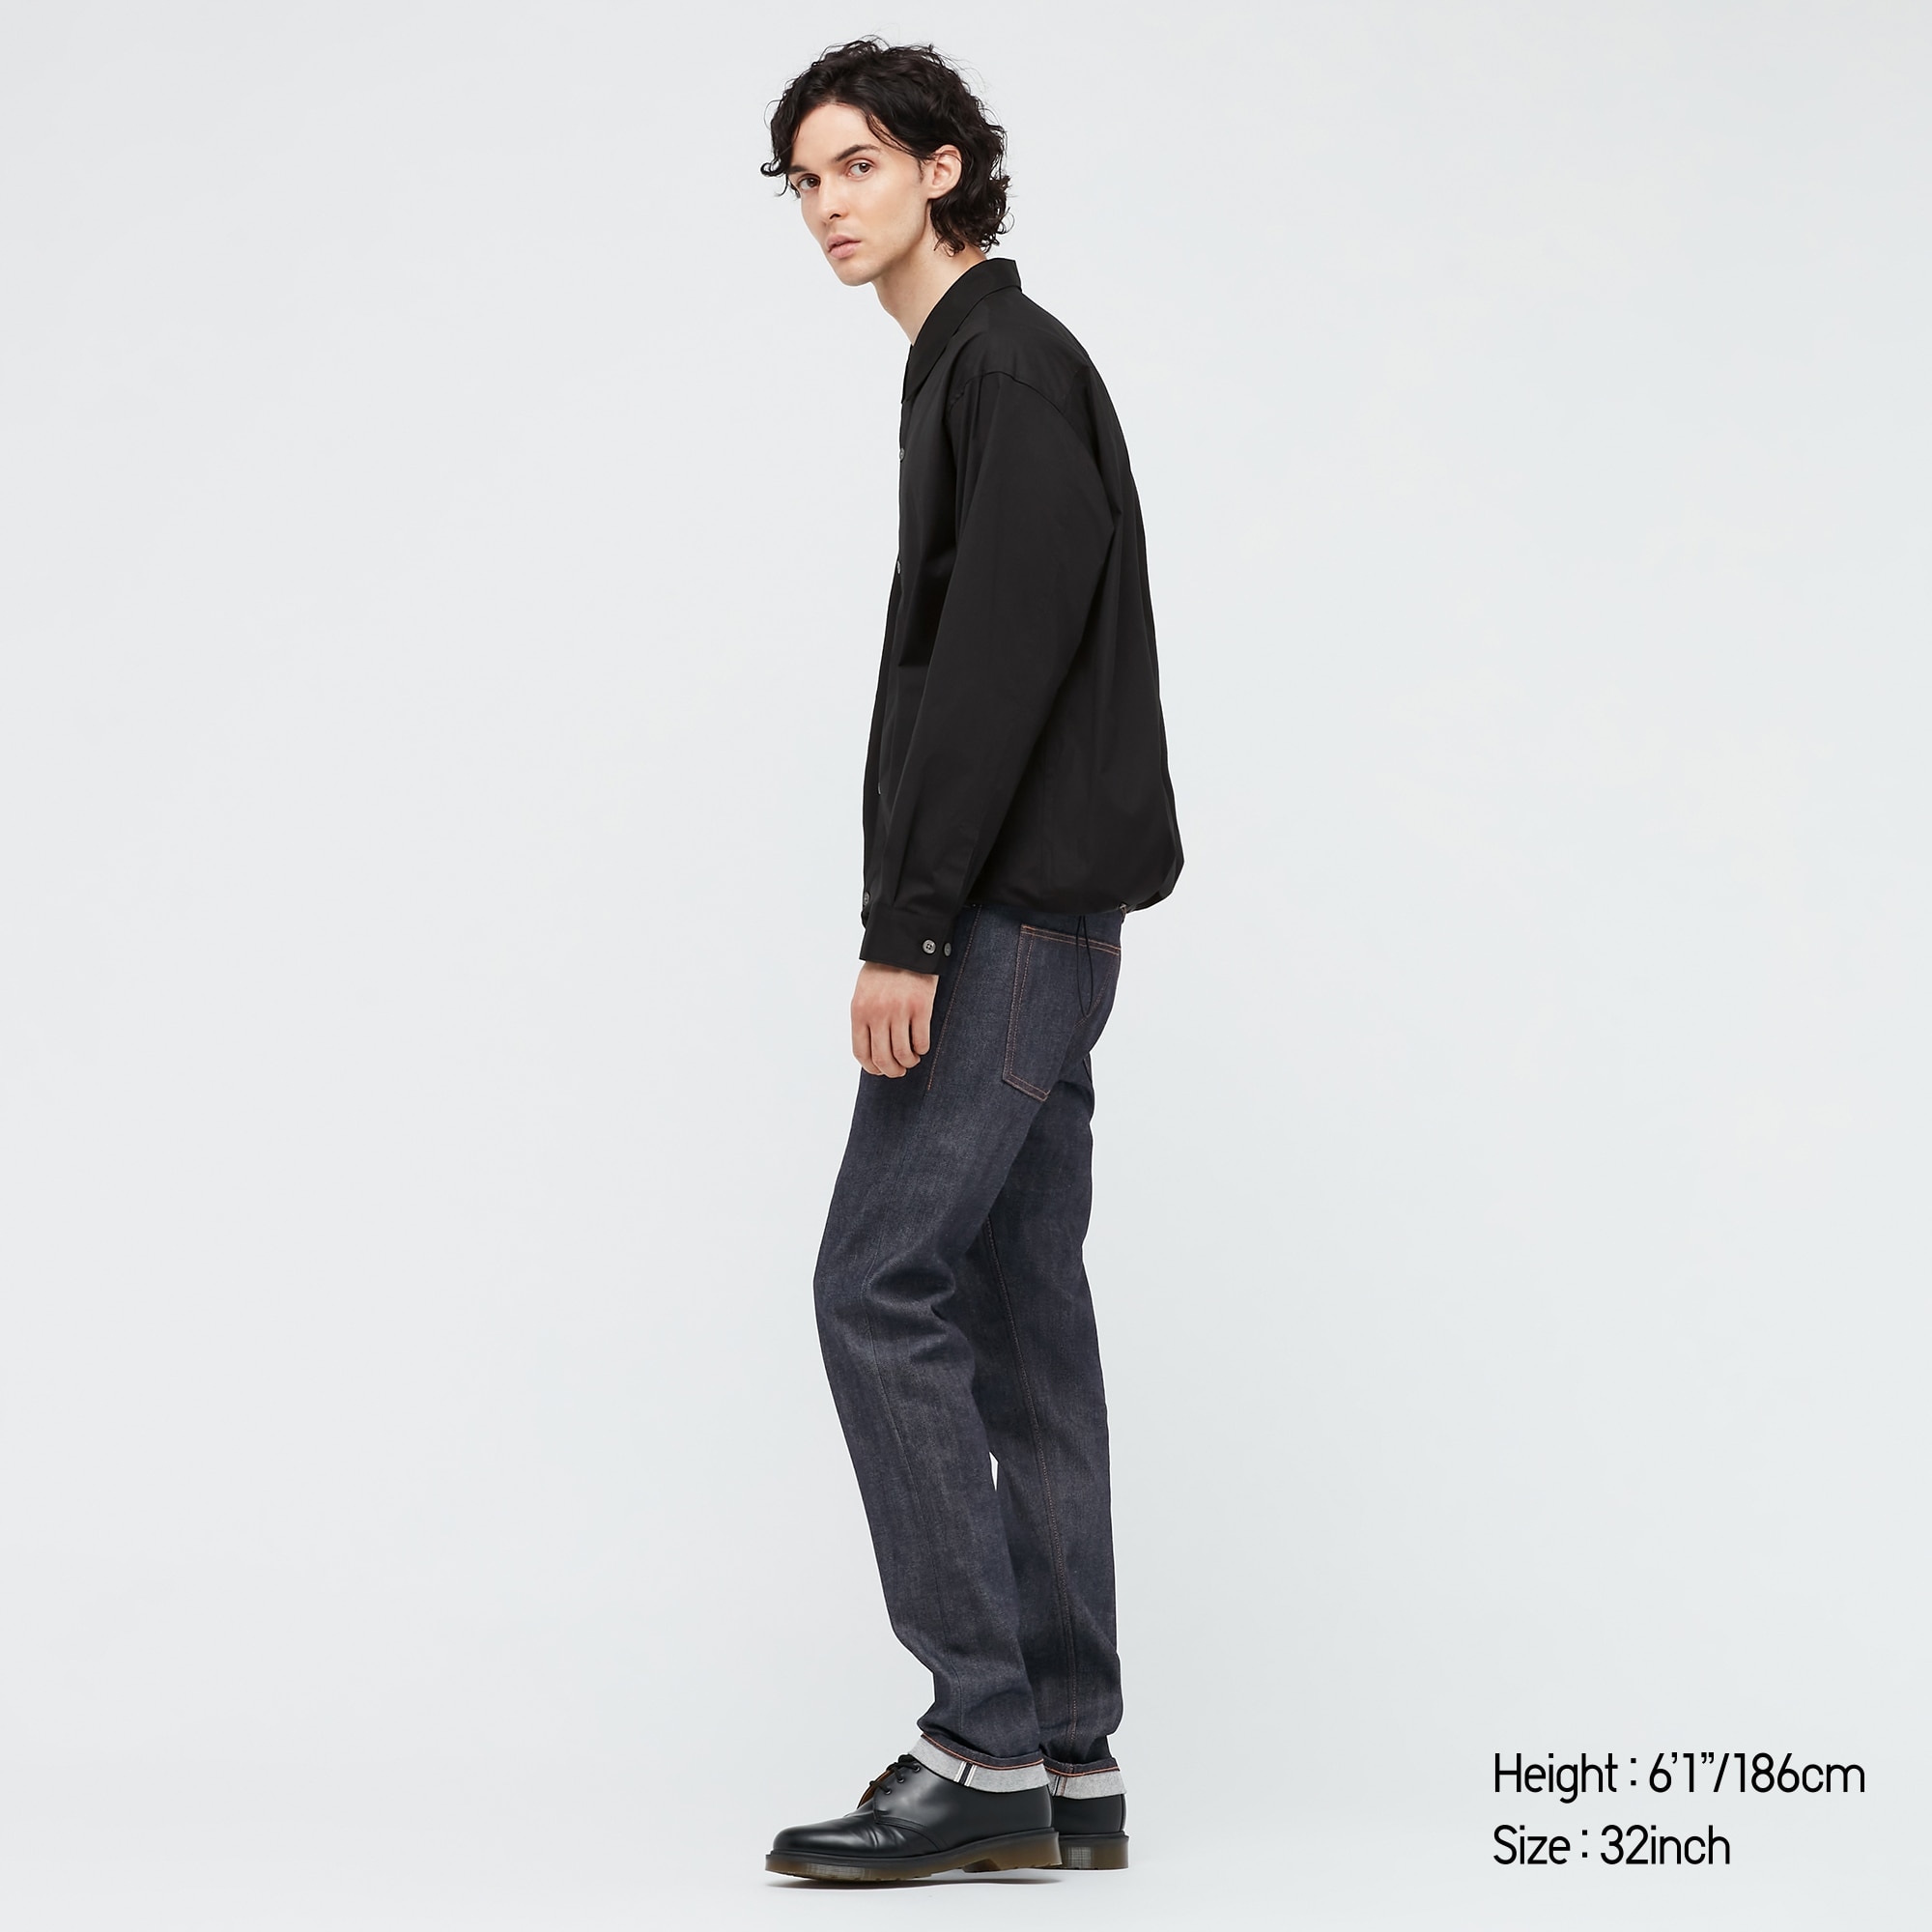 UNIQLO  JEANS  INVISIBLE QUALITY Learn all the hidden qualities of our  products that may not be obvious at first glance